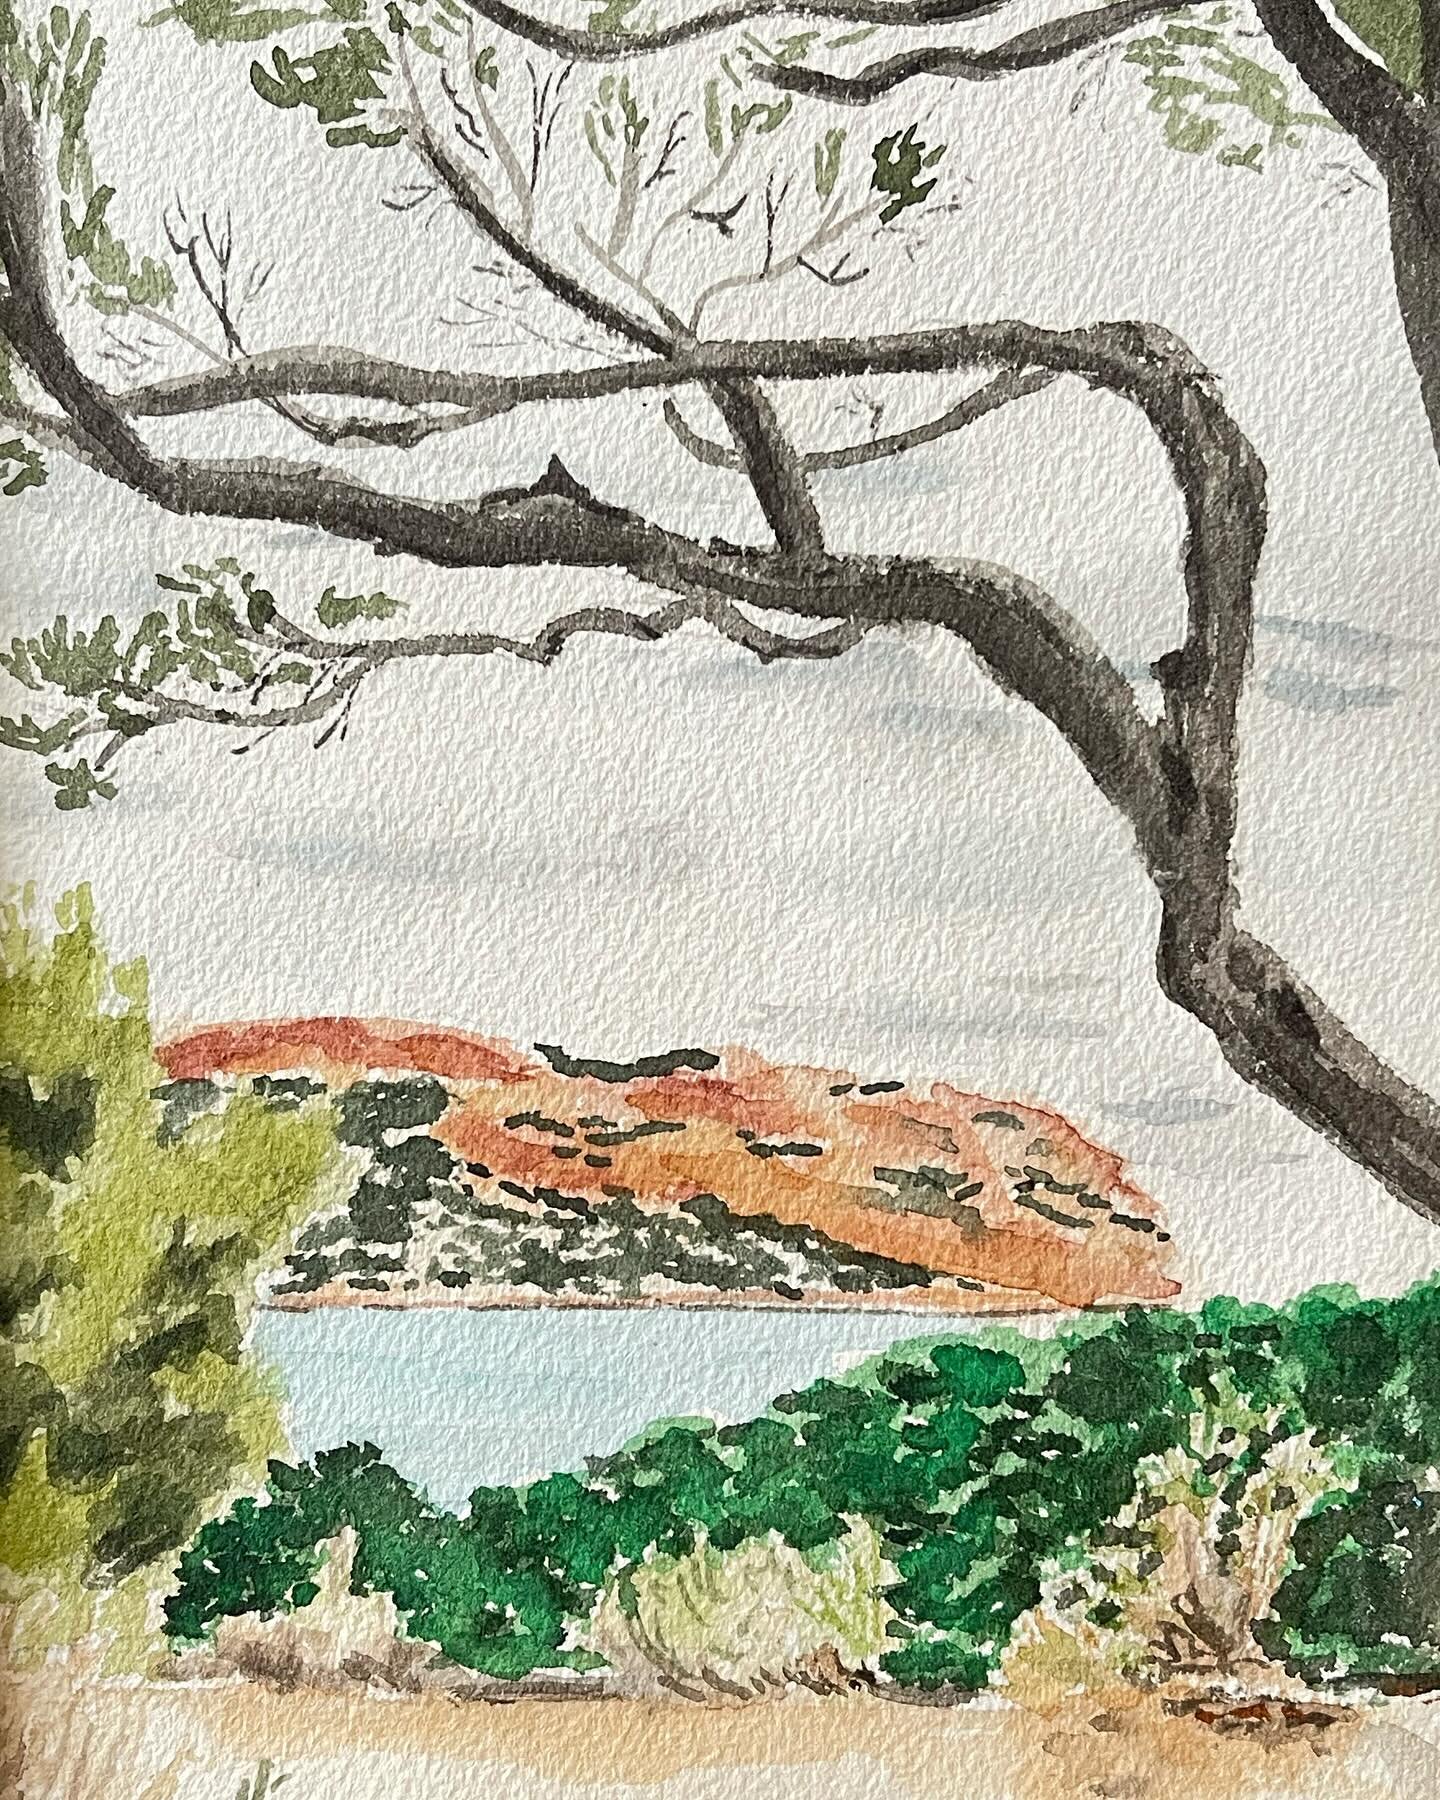 Another piece in the @thescoutedstudio show I am really proud of. I always love getting off the beaten trail when I am in France, so the hike here was worth it! The colors of the rock formations (called calanques) are magnificent. The south of France